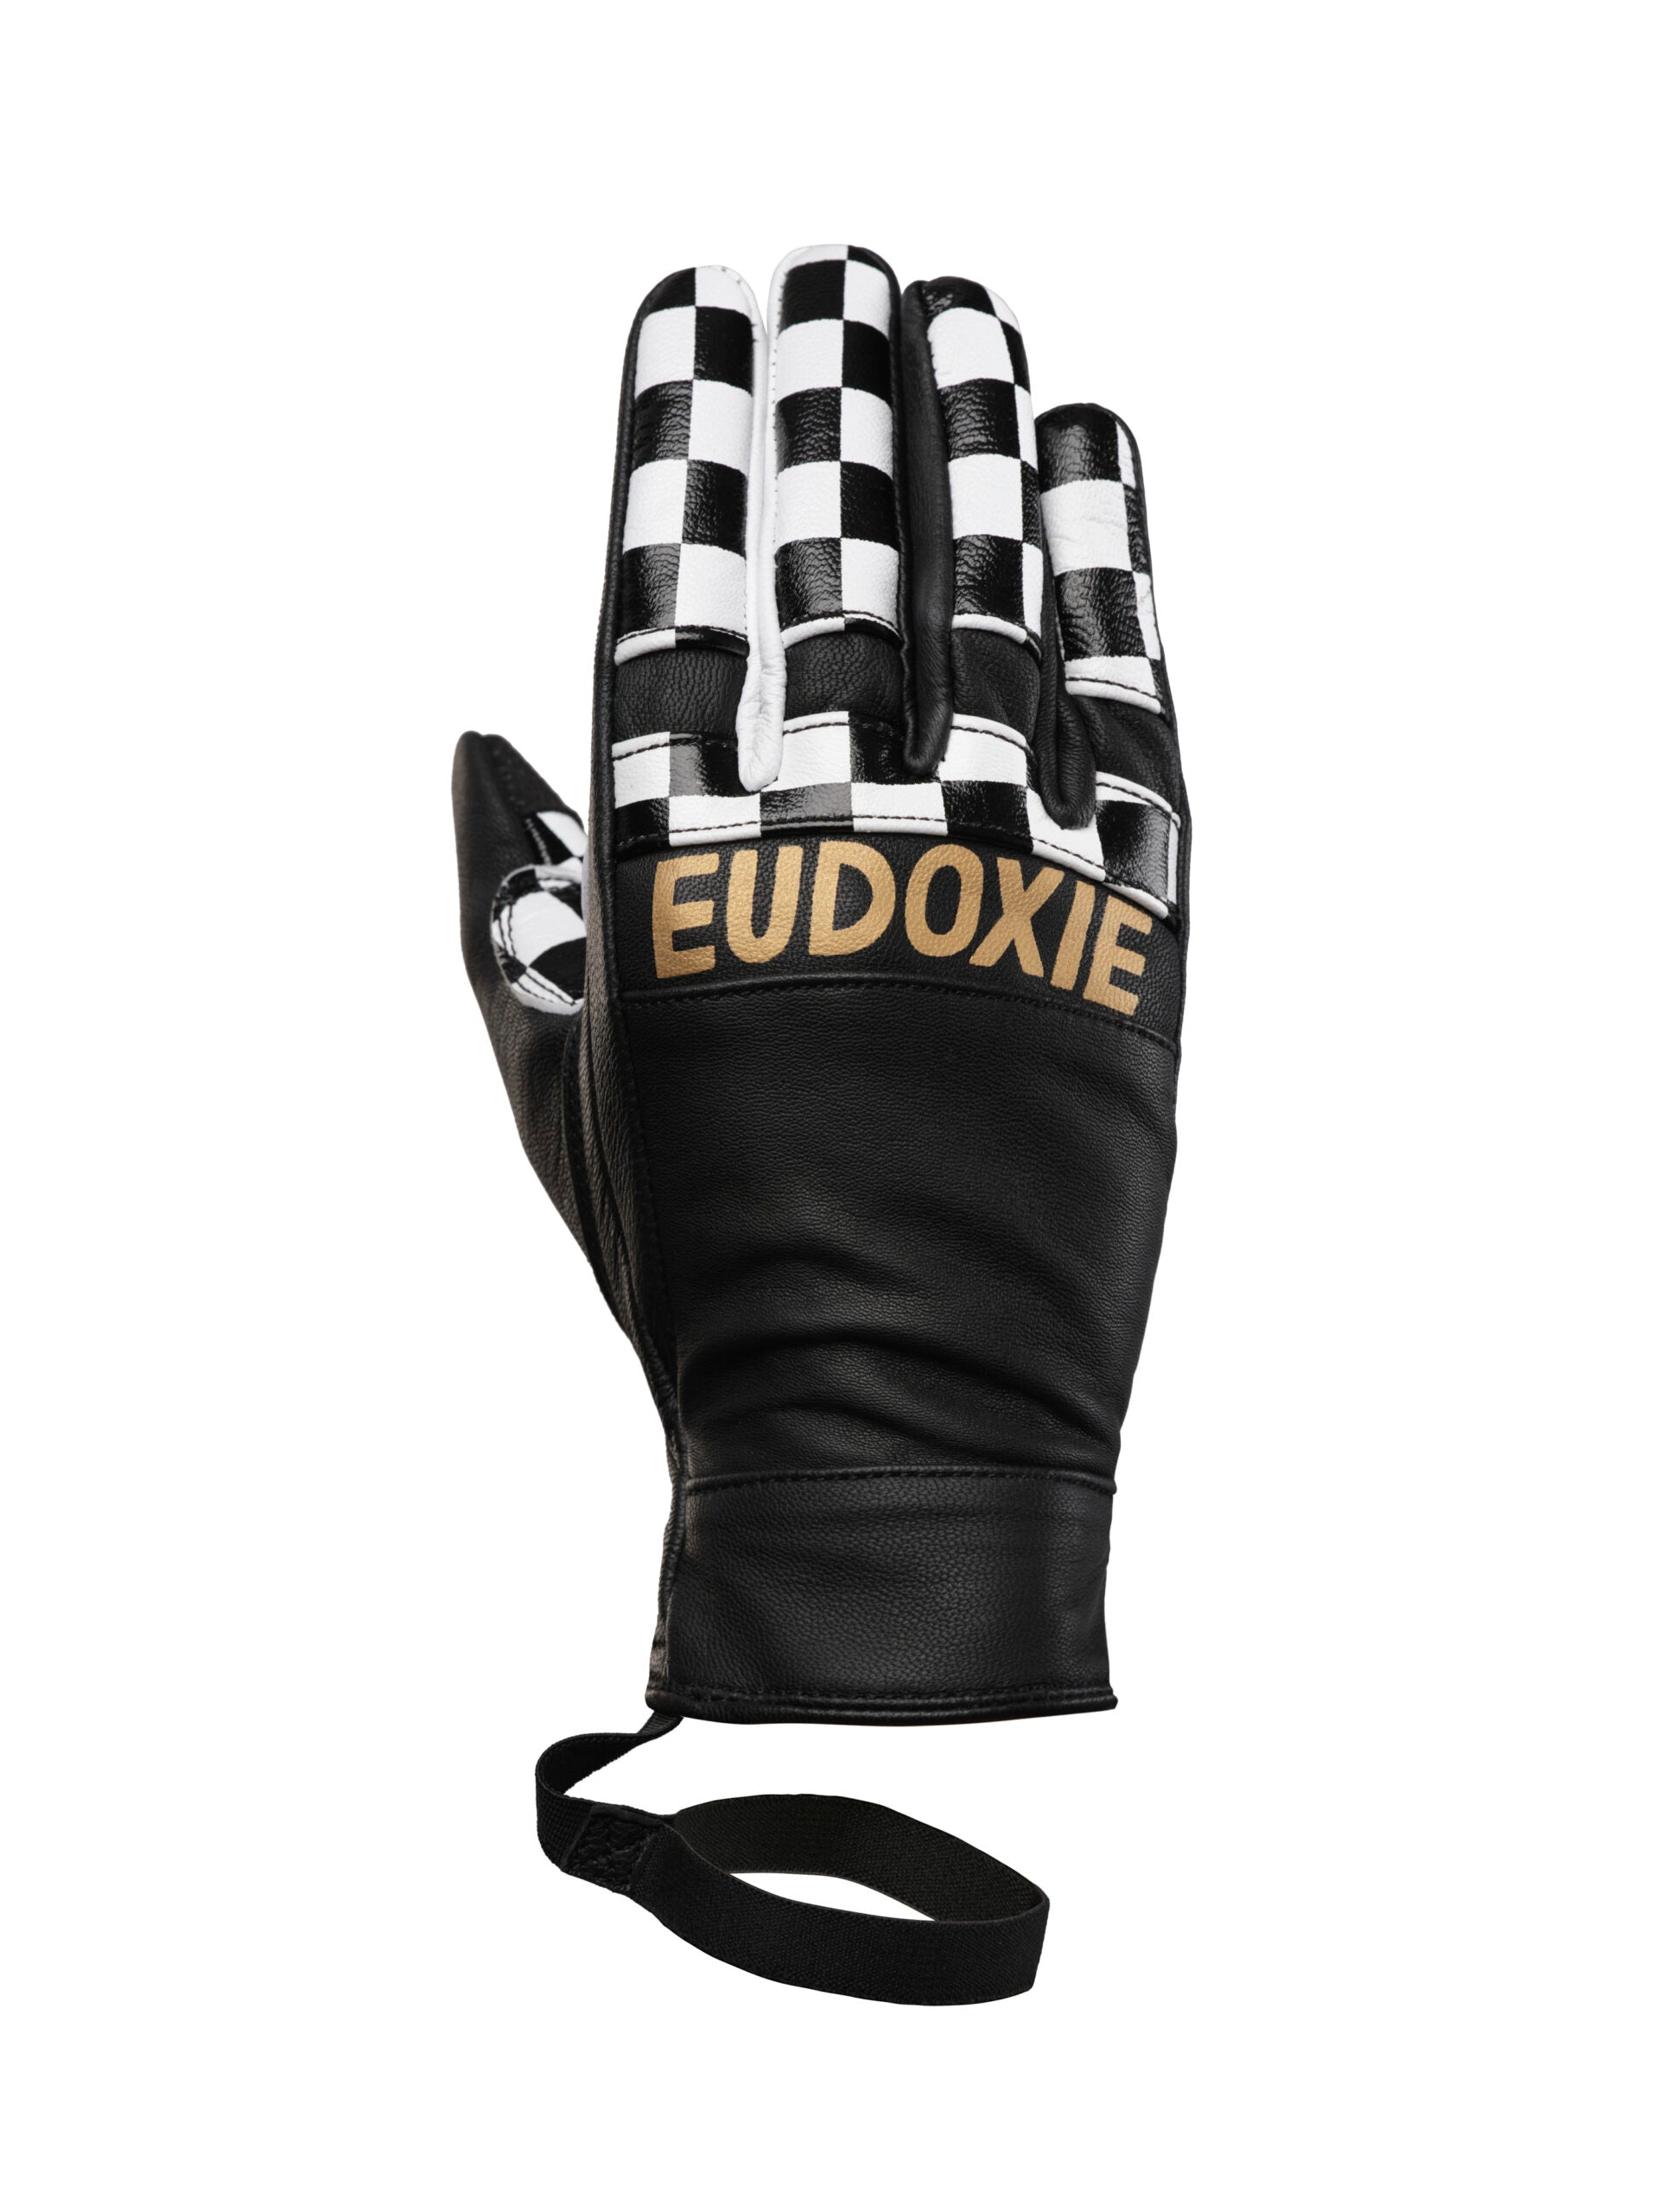 Eudoxie Black and Gold Gloves